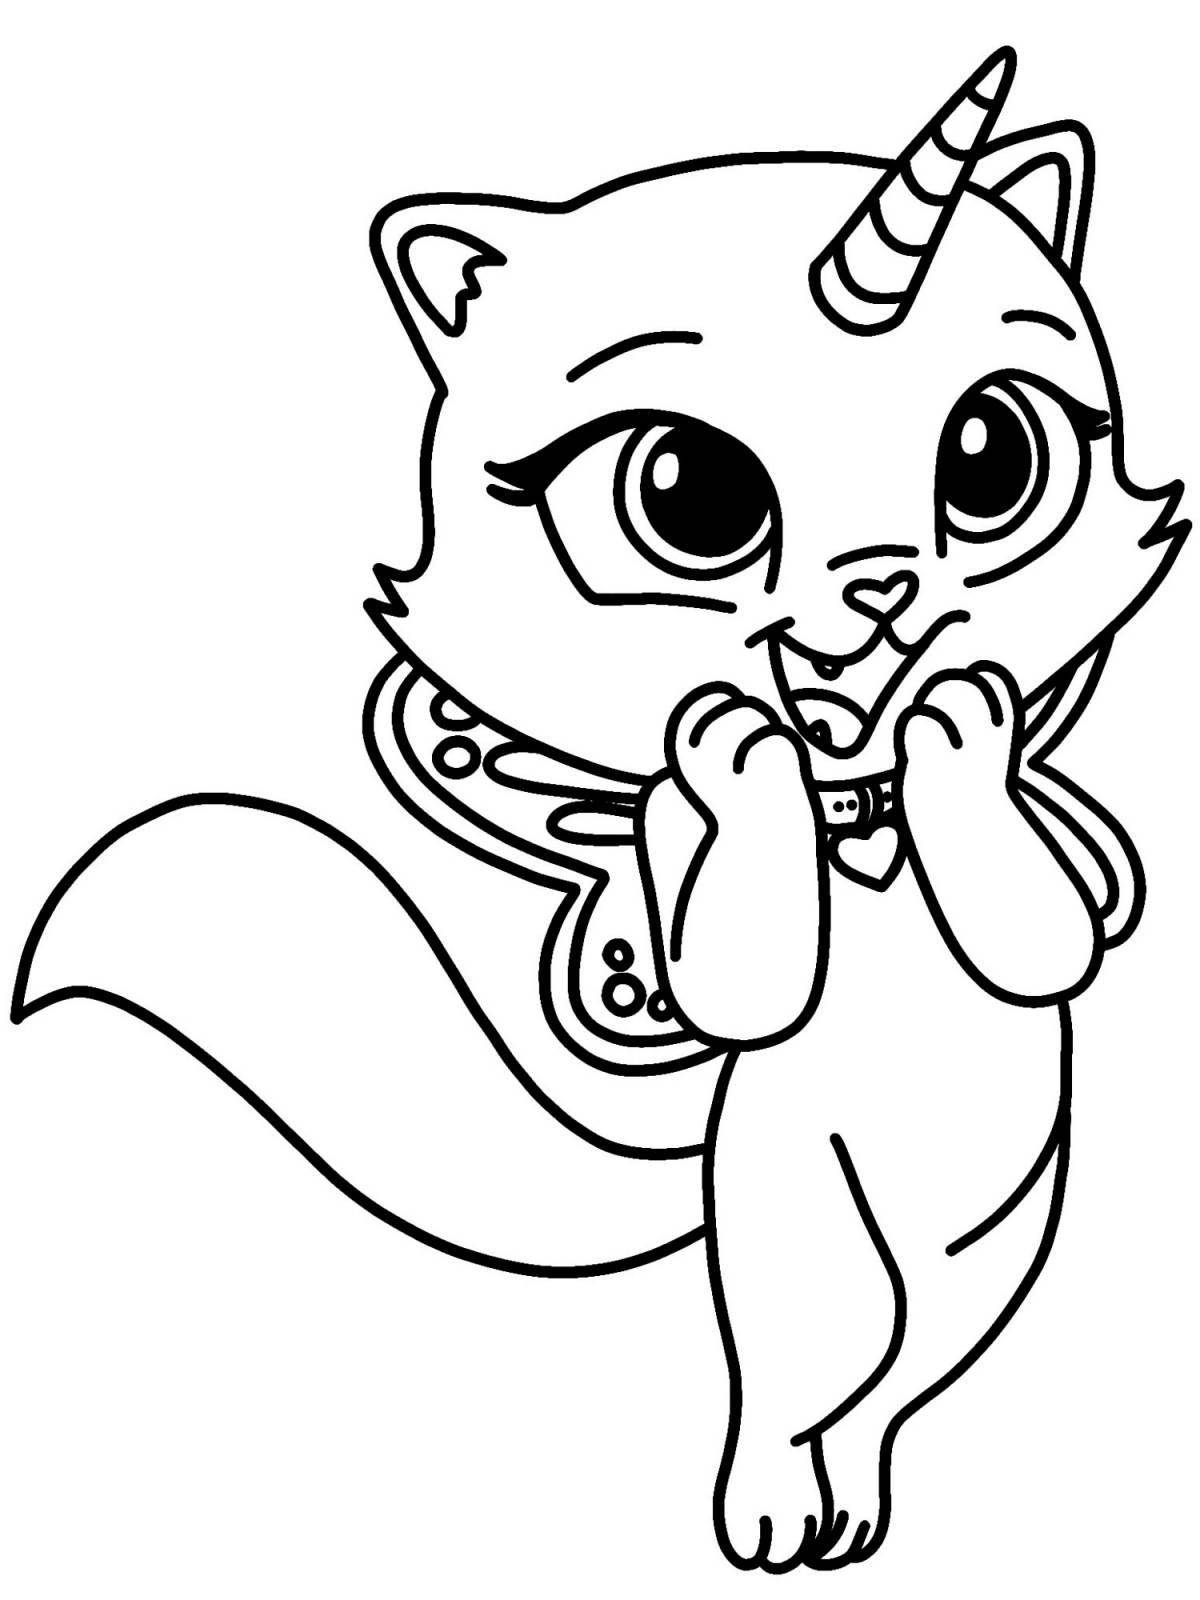 Naughty cats coloring pages for girls